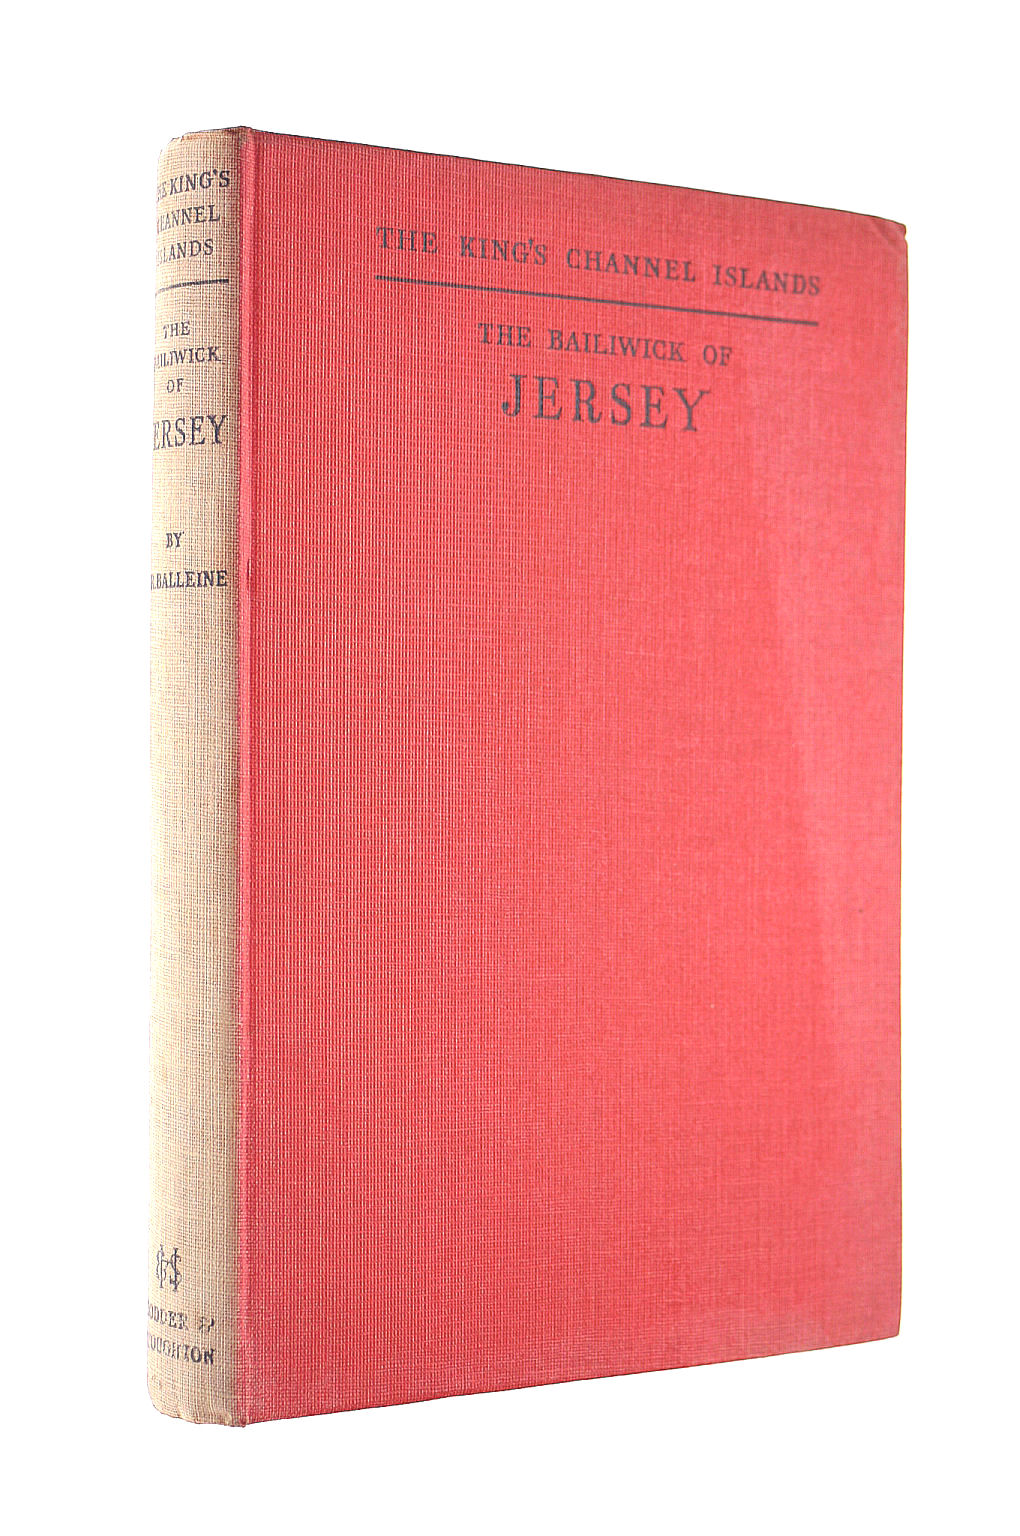 BALLEINE, G. R. - The Bailiwick of Jersey (King's Channel Islands series)